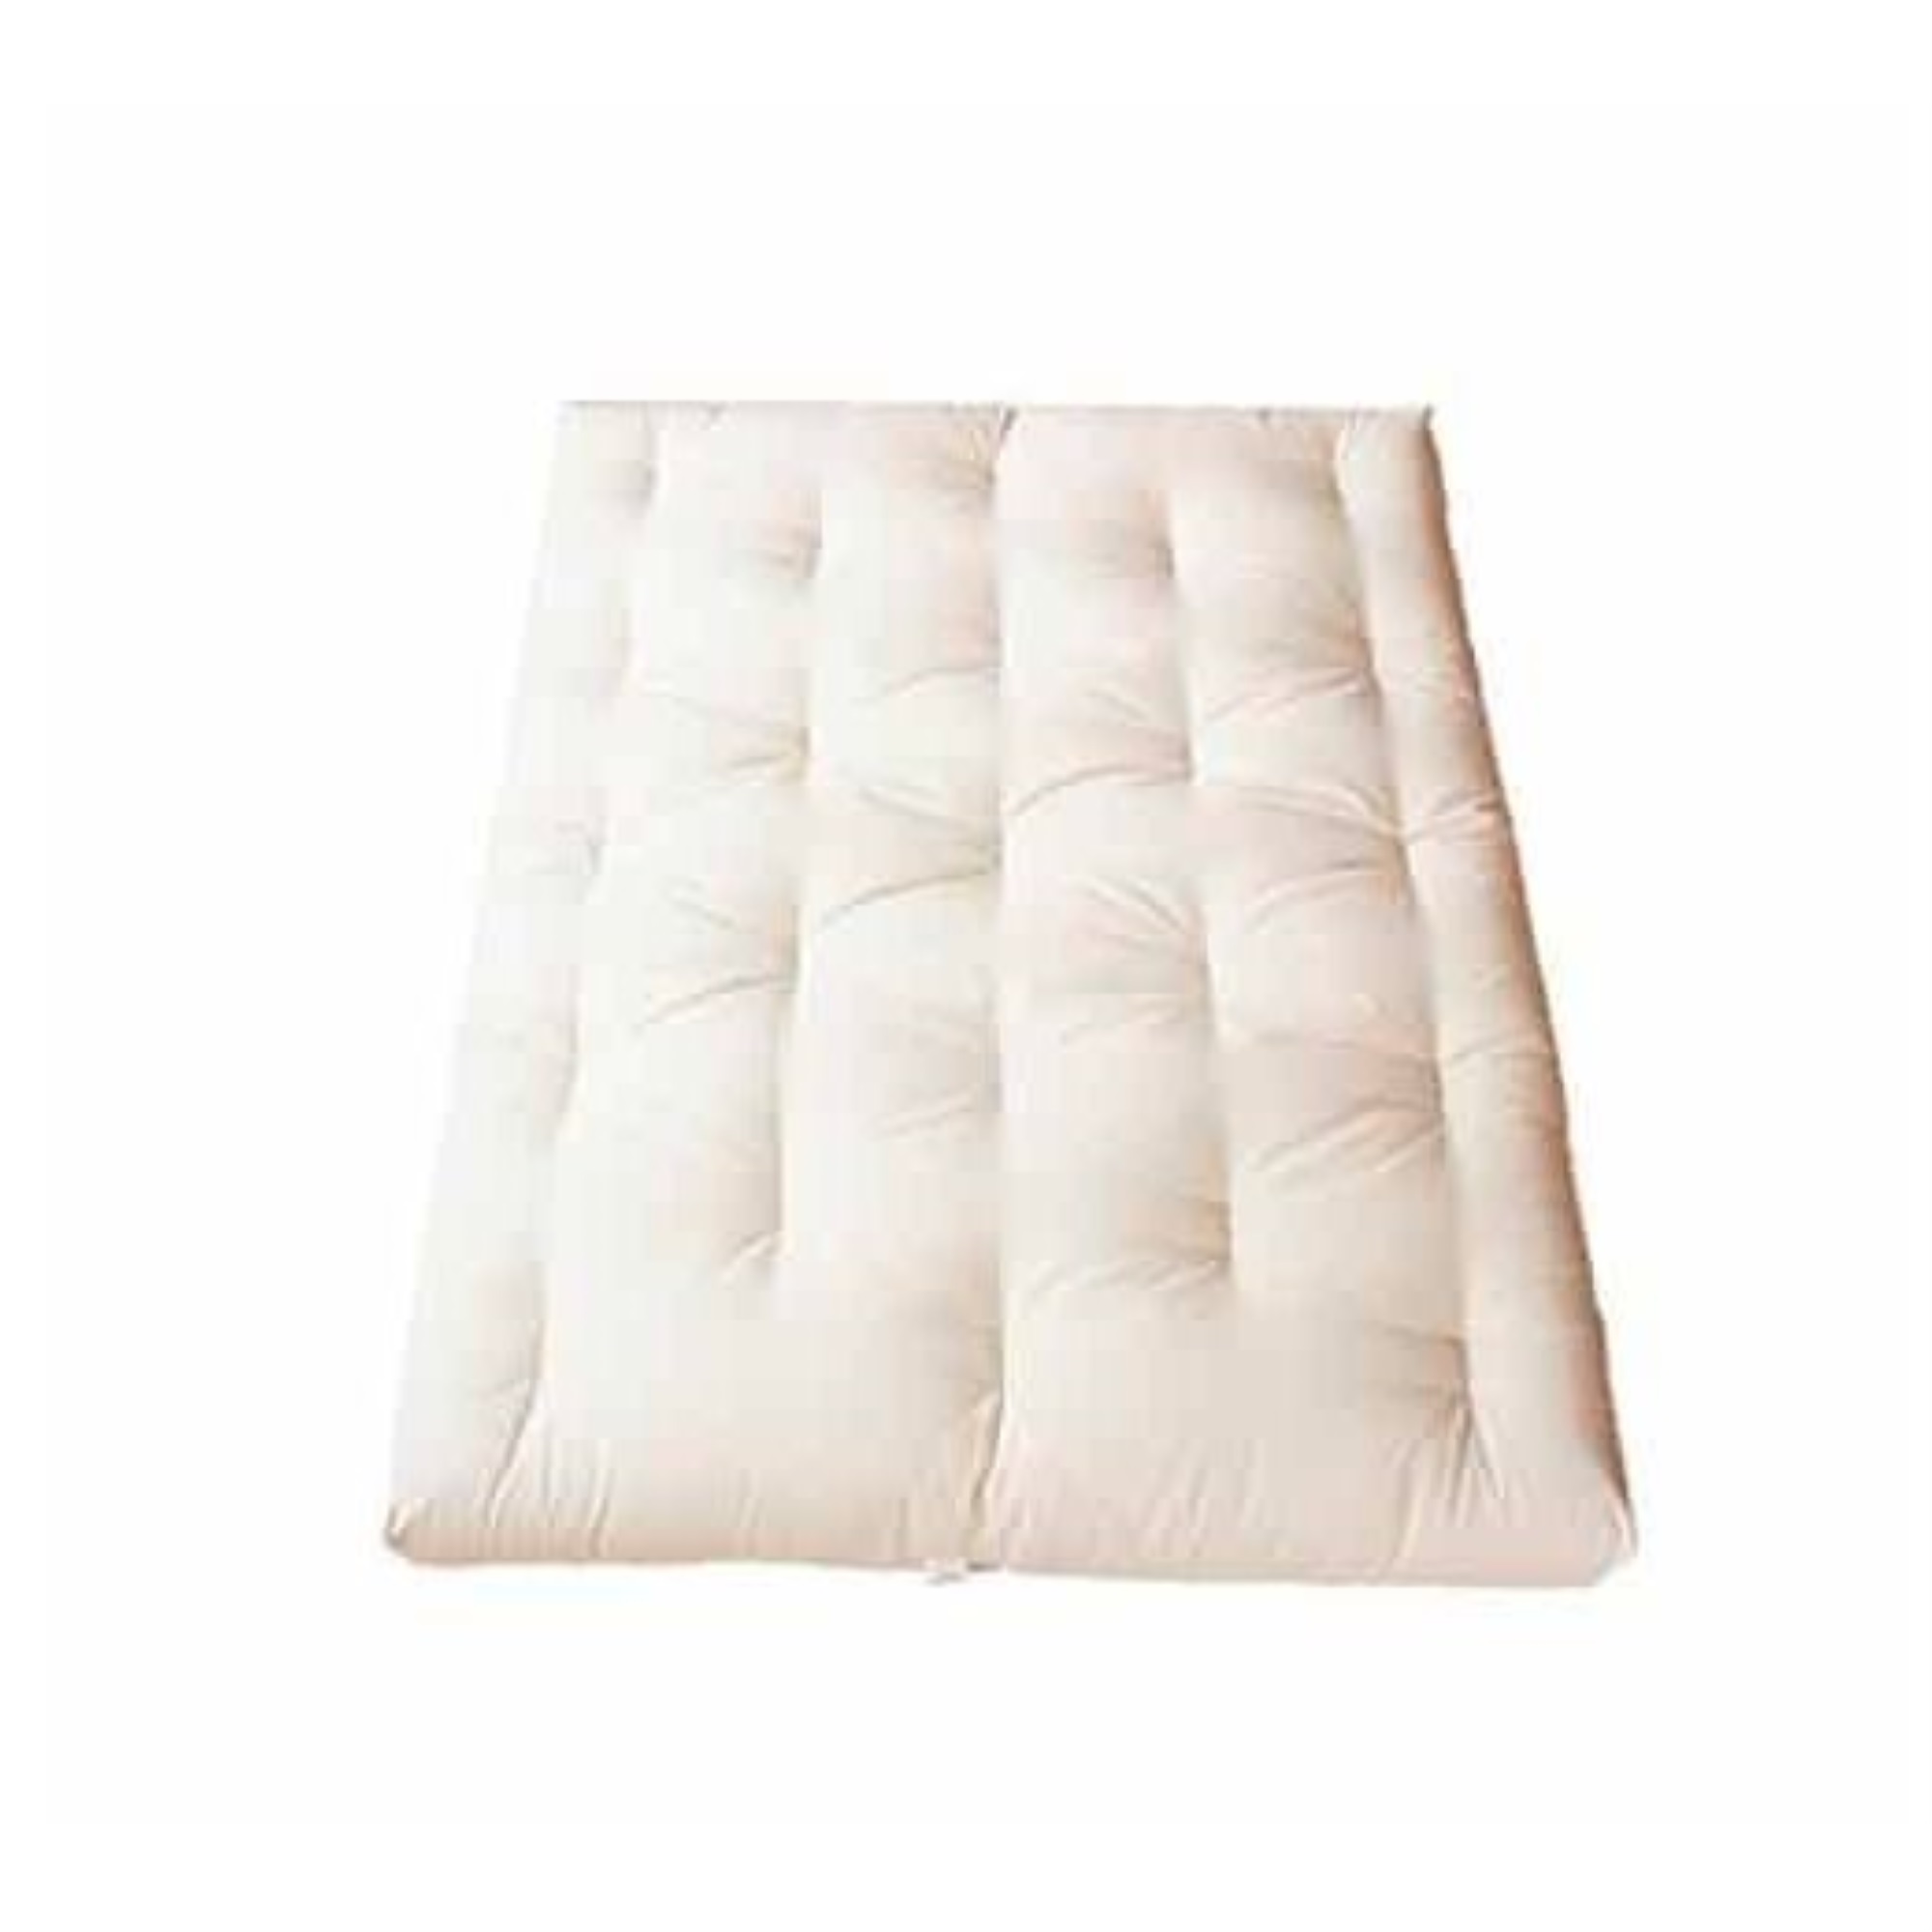 White Lotus Home Green Cotton  King 7" Mattress with 2" Foam core in 100% Cotton Fabric Case